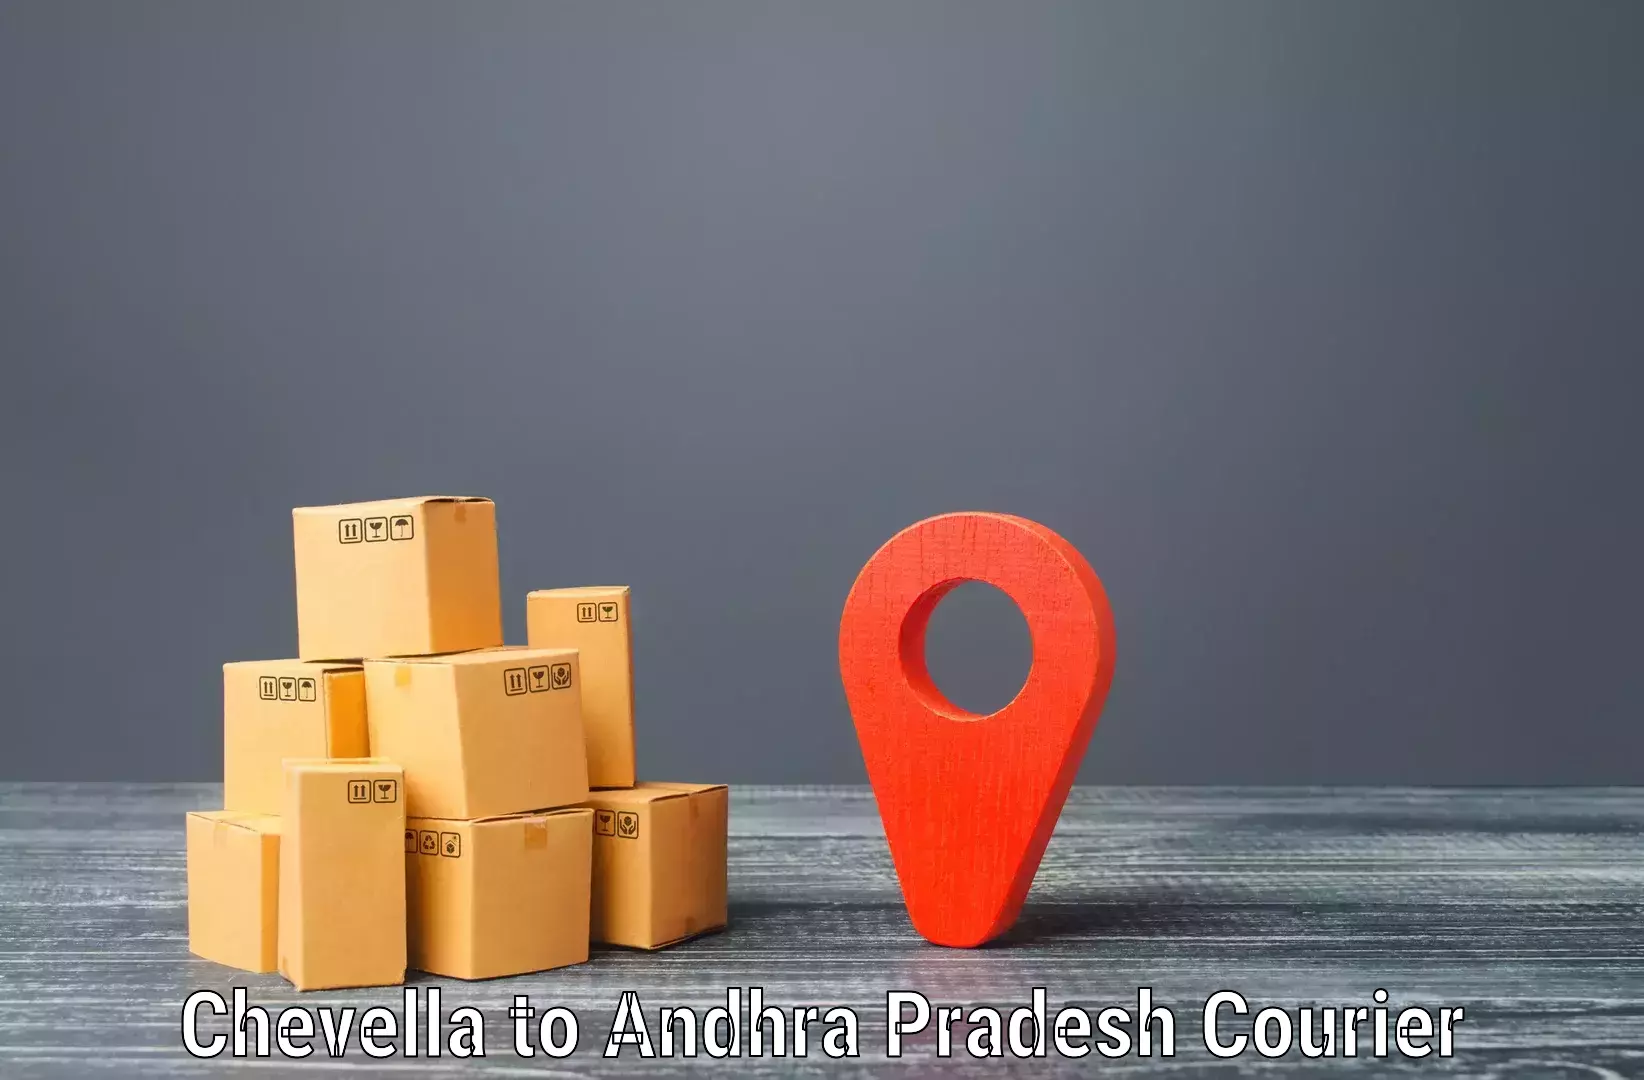 Customer-oriented courier services Chevella to Gooty